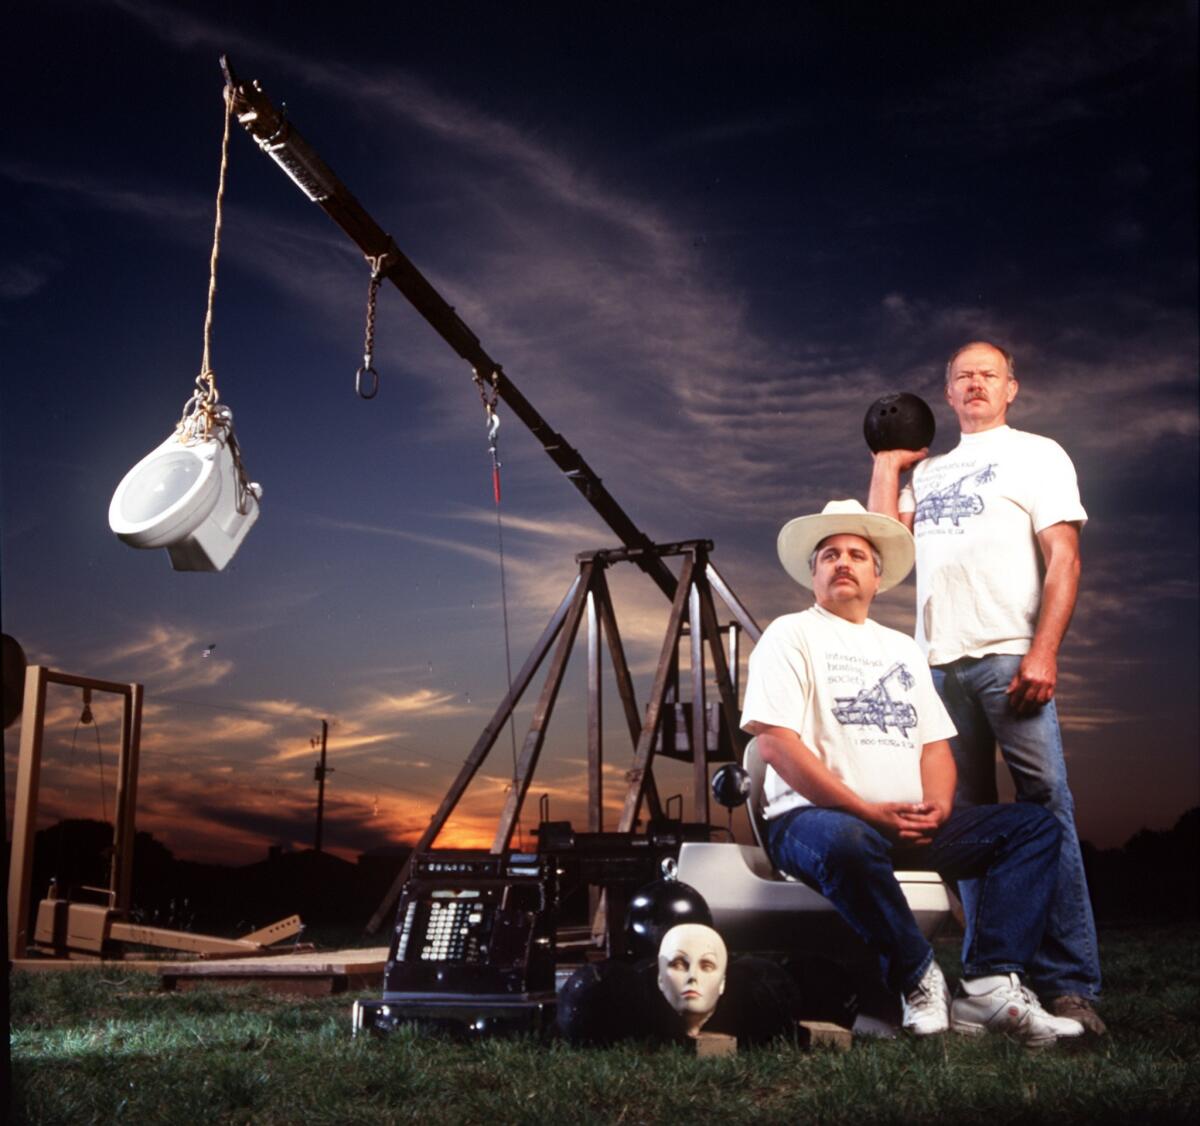 John Quincy, left, and Richard Clifford built a trebuchet with a 24-foot throwing arm. They named it "Baby Thor."